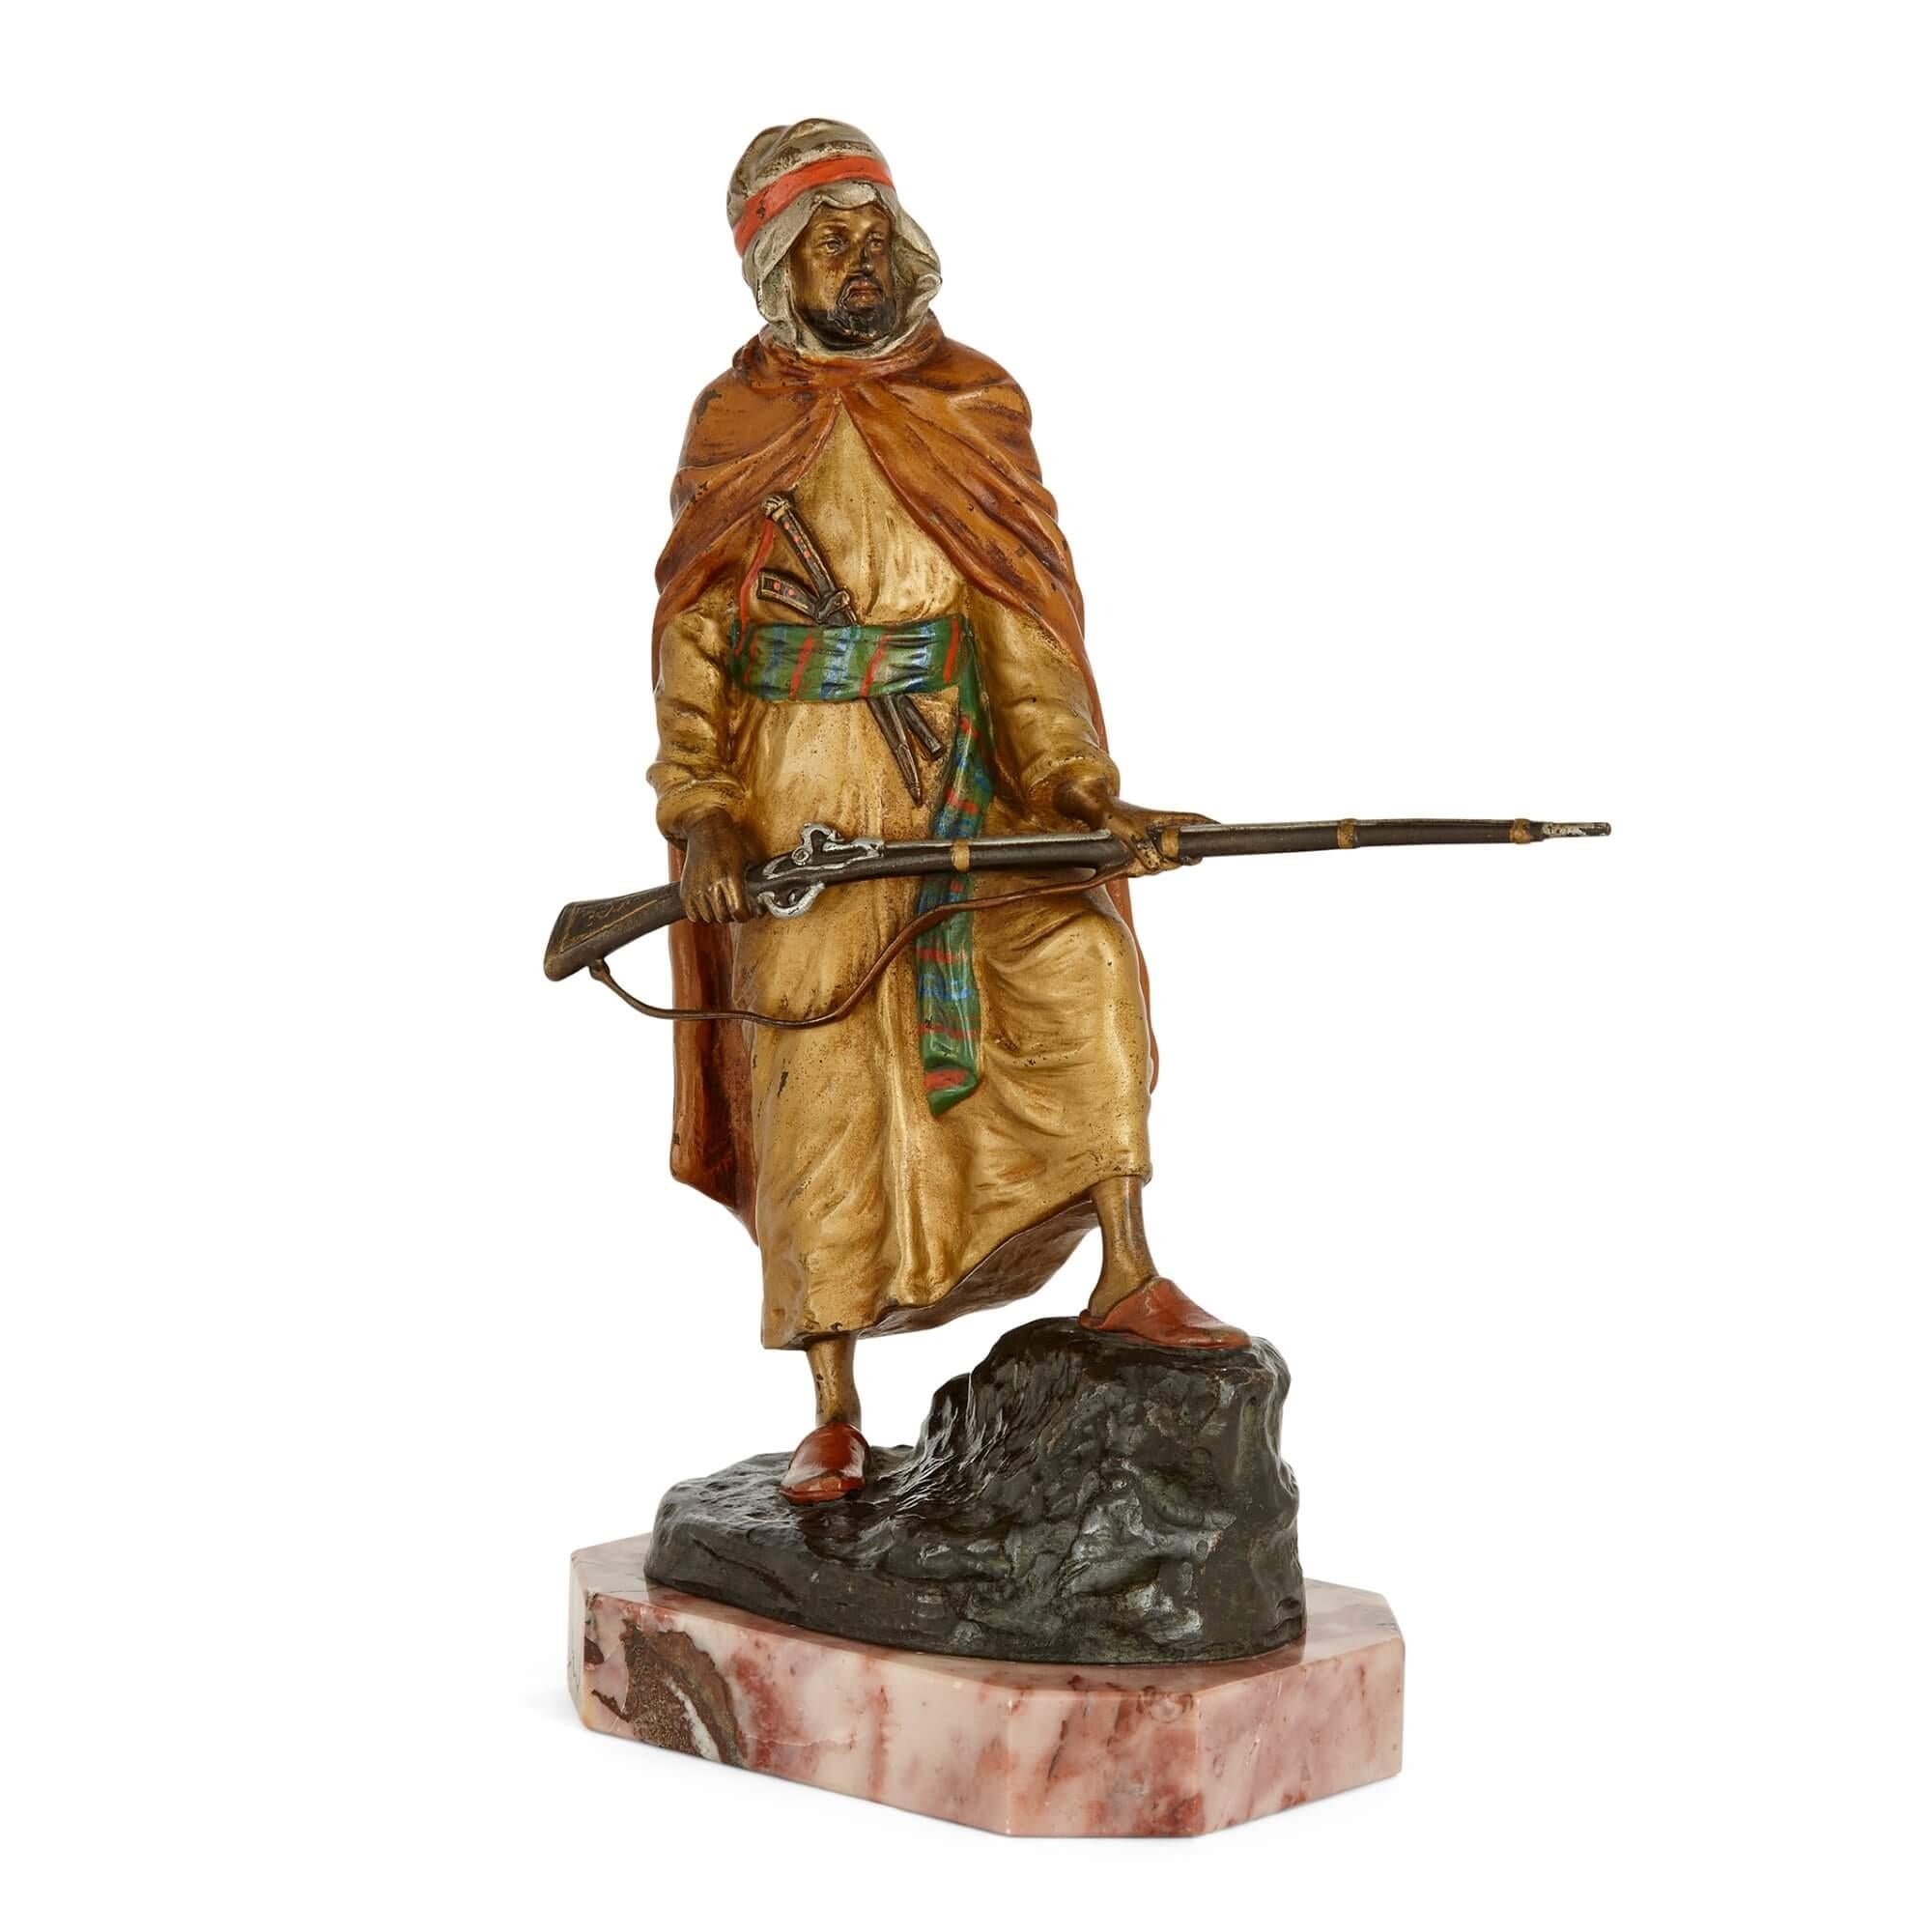 Large Austrian figurative cold-painted bronze sculpture
Austrian, c. 1910
Height 25cm, width 17cm, depth 9cm

This cold-painted bronze sculpture depicts an Arab soldier in a defensive position, dressed in typical Orientalist robes. The vibrant